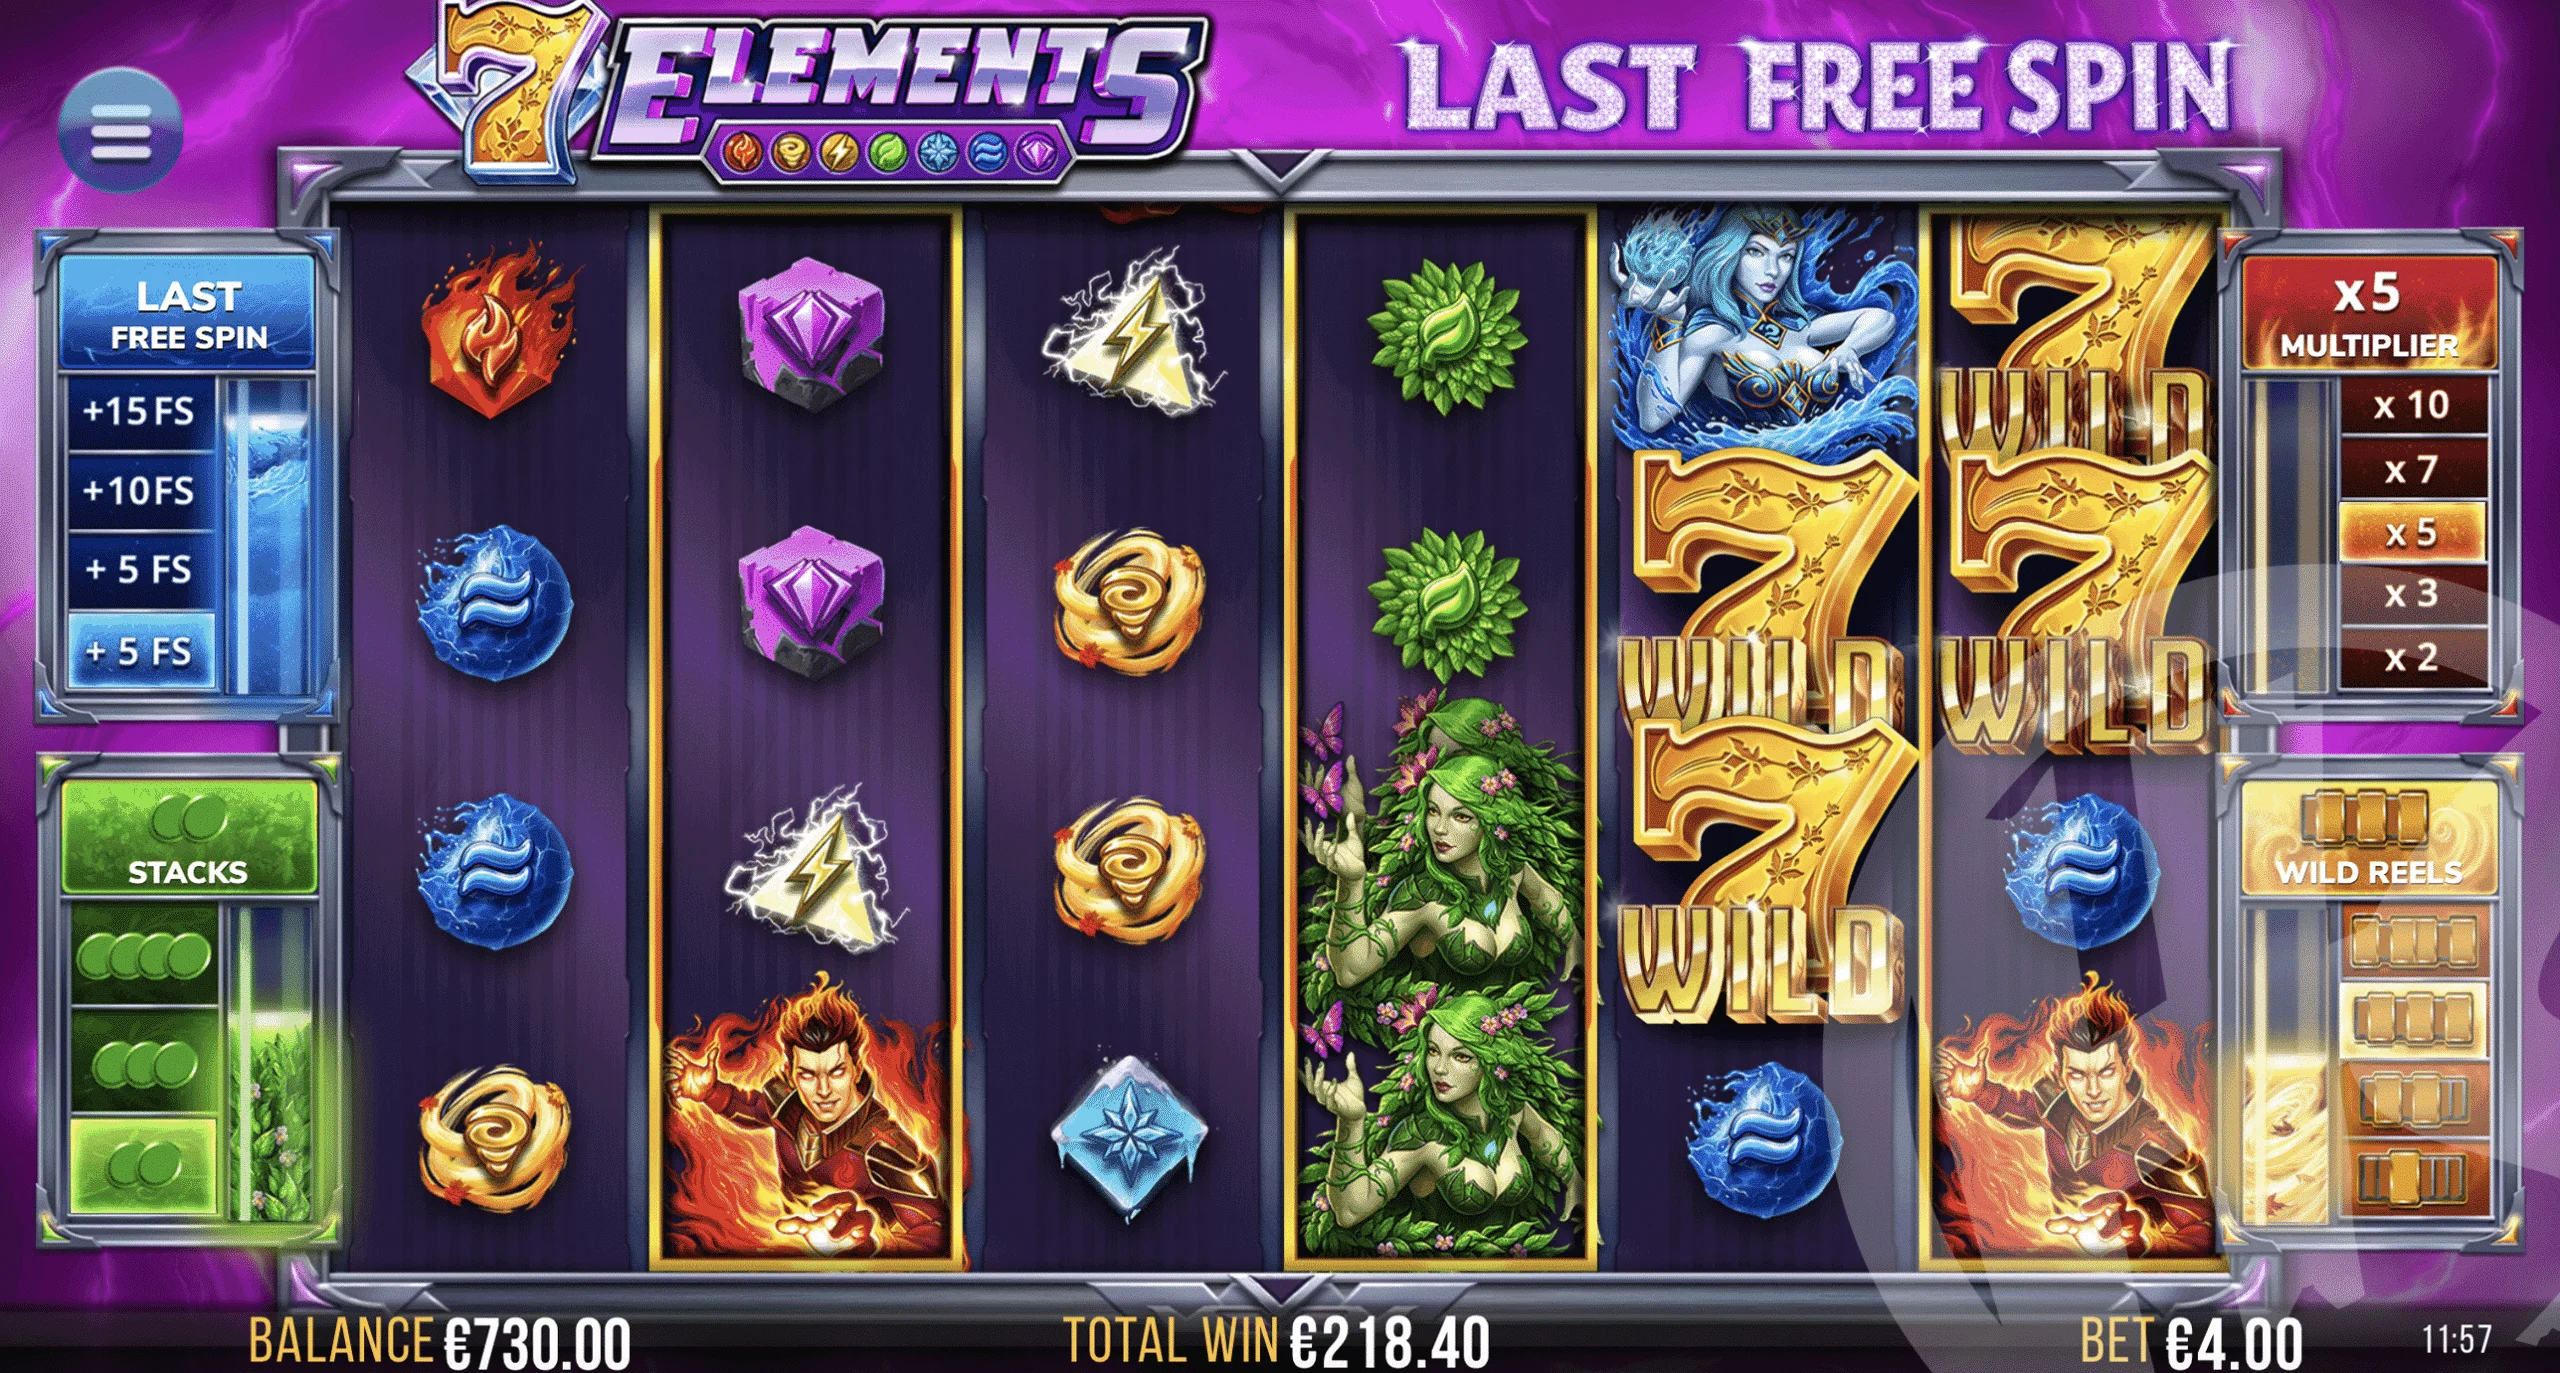 Collect Hero Gems and Fill Meters to Boost Free Spins